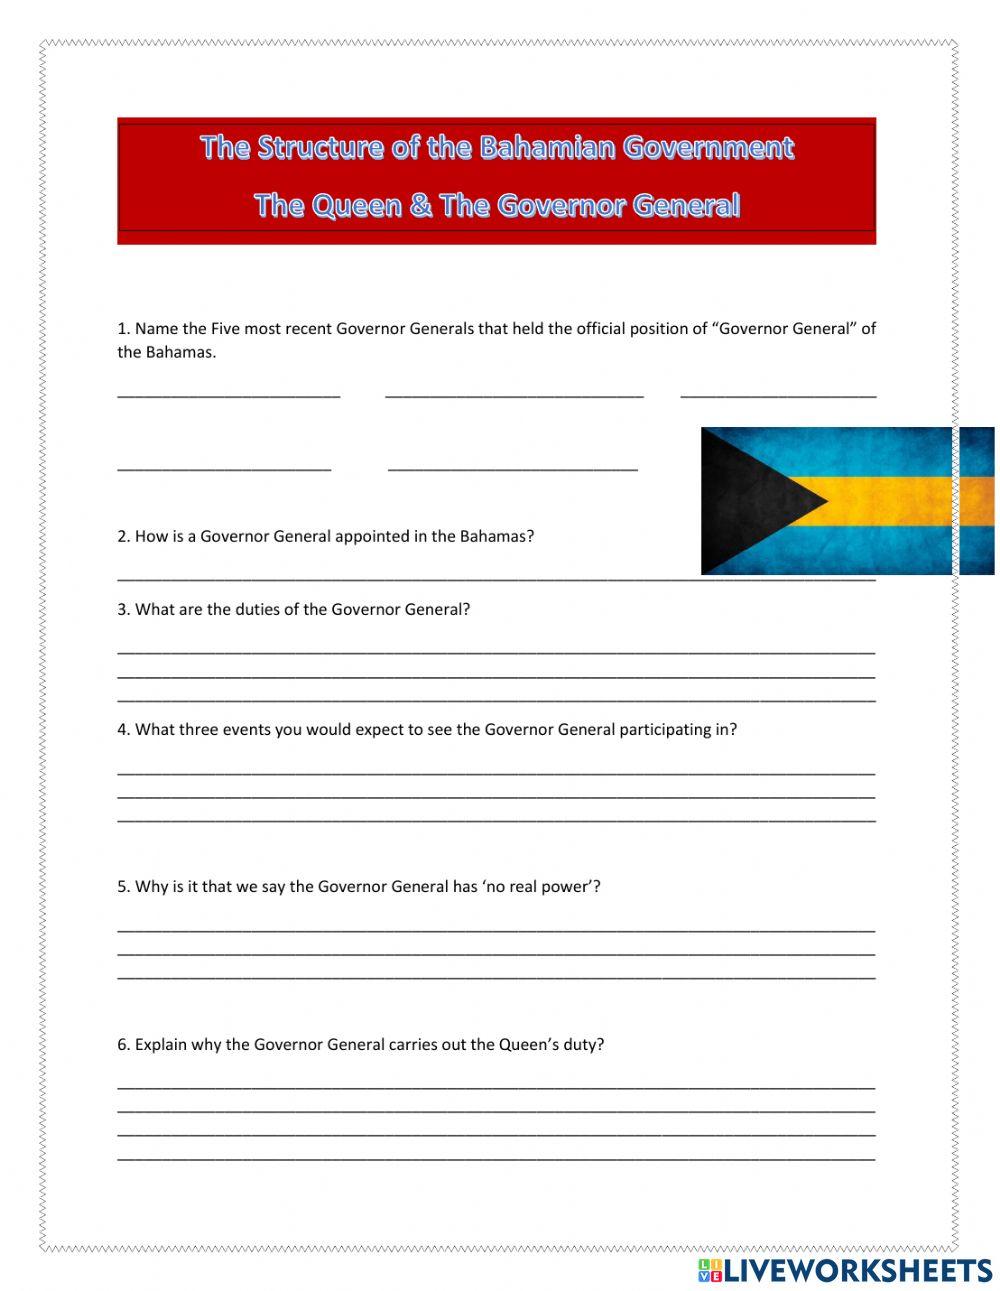 The Structure of the Bahamas Government